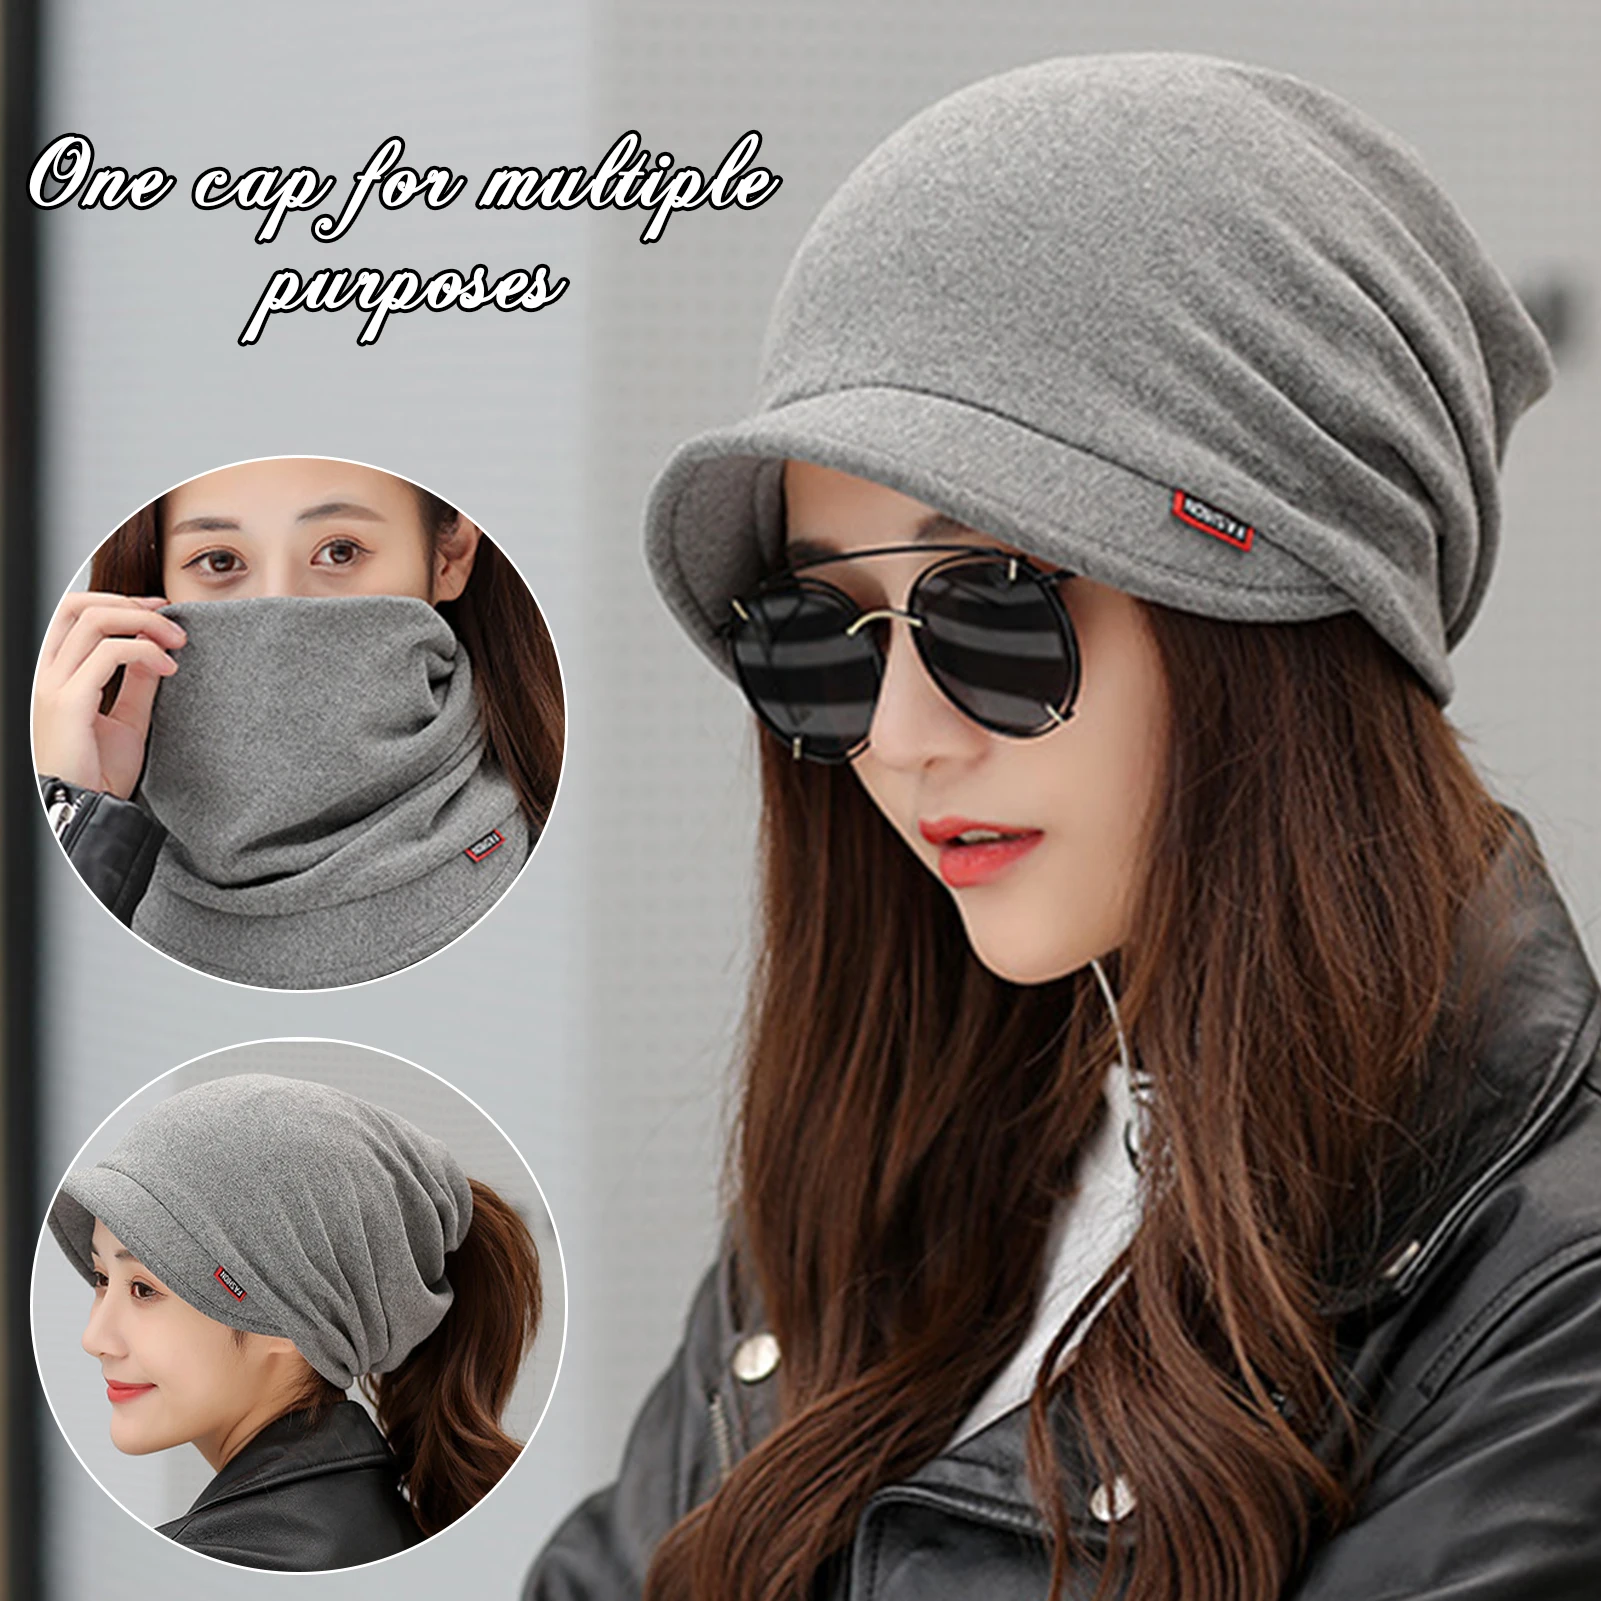 

Women's Cotton Hat Thick Warm Windproof Simple Solid Color Beanie Hat Exquisite Gift Nice Unique Adjustable for Outdoor Use